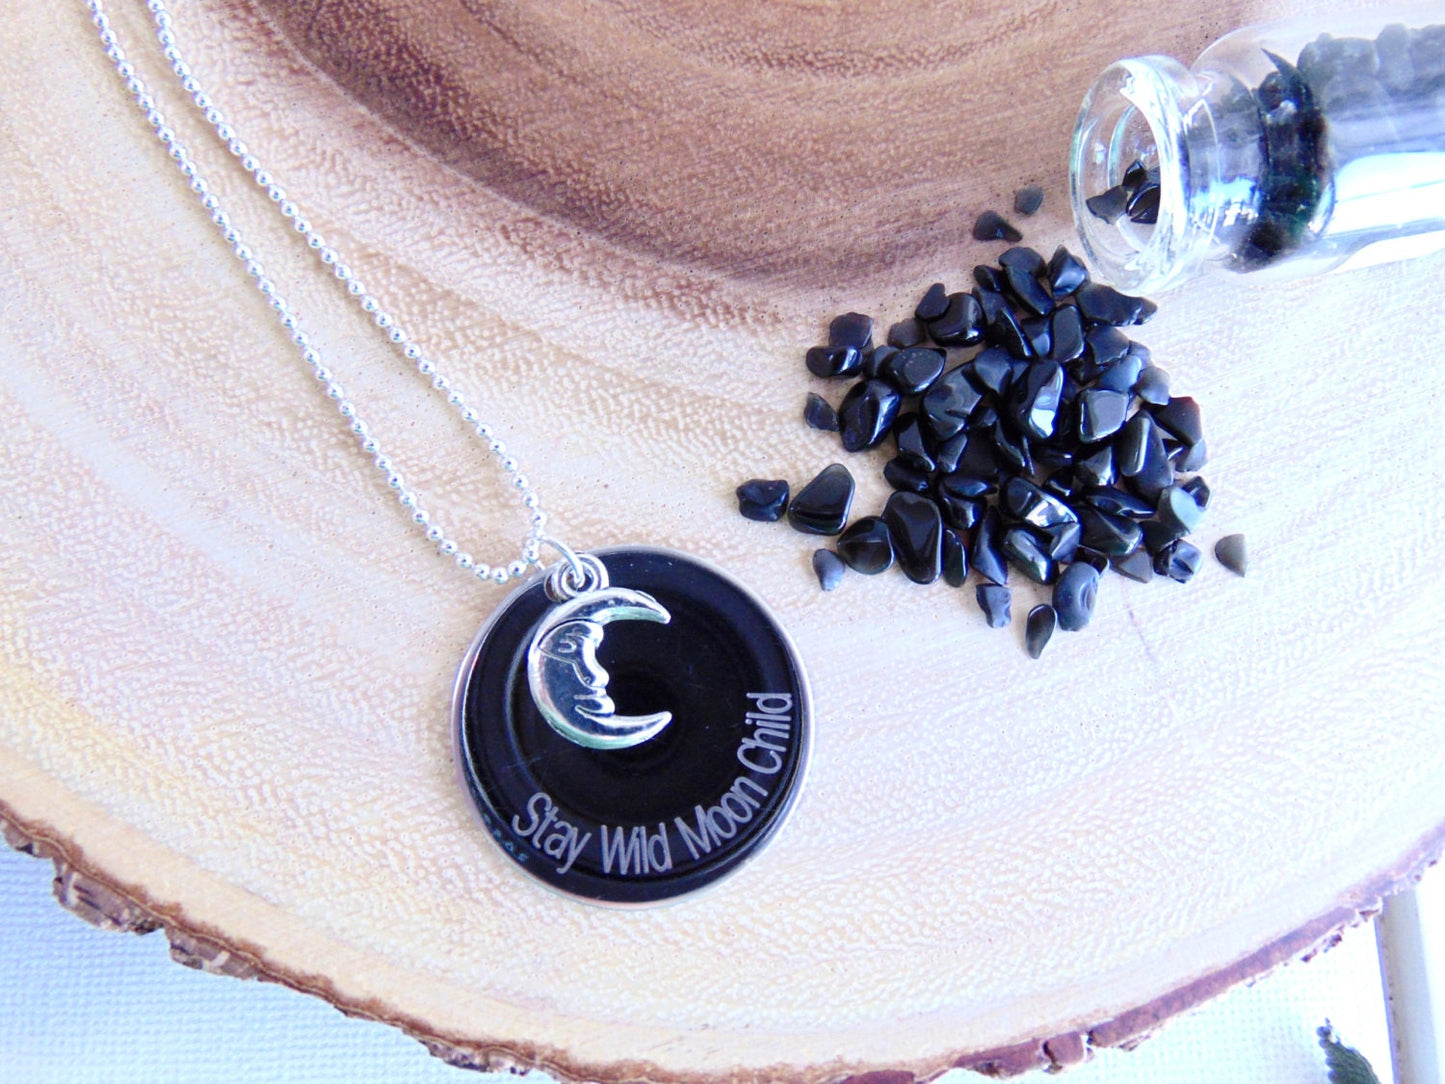 Stay Wild Moon Child - necklace, Silver crescent moon pendant